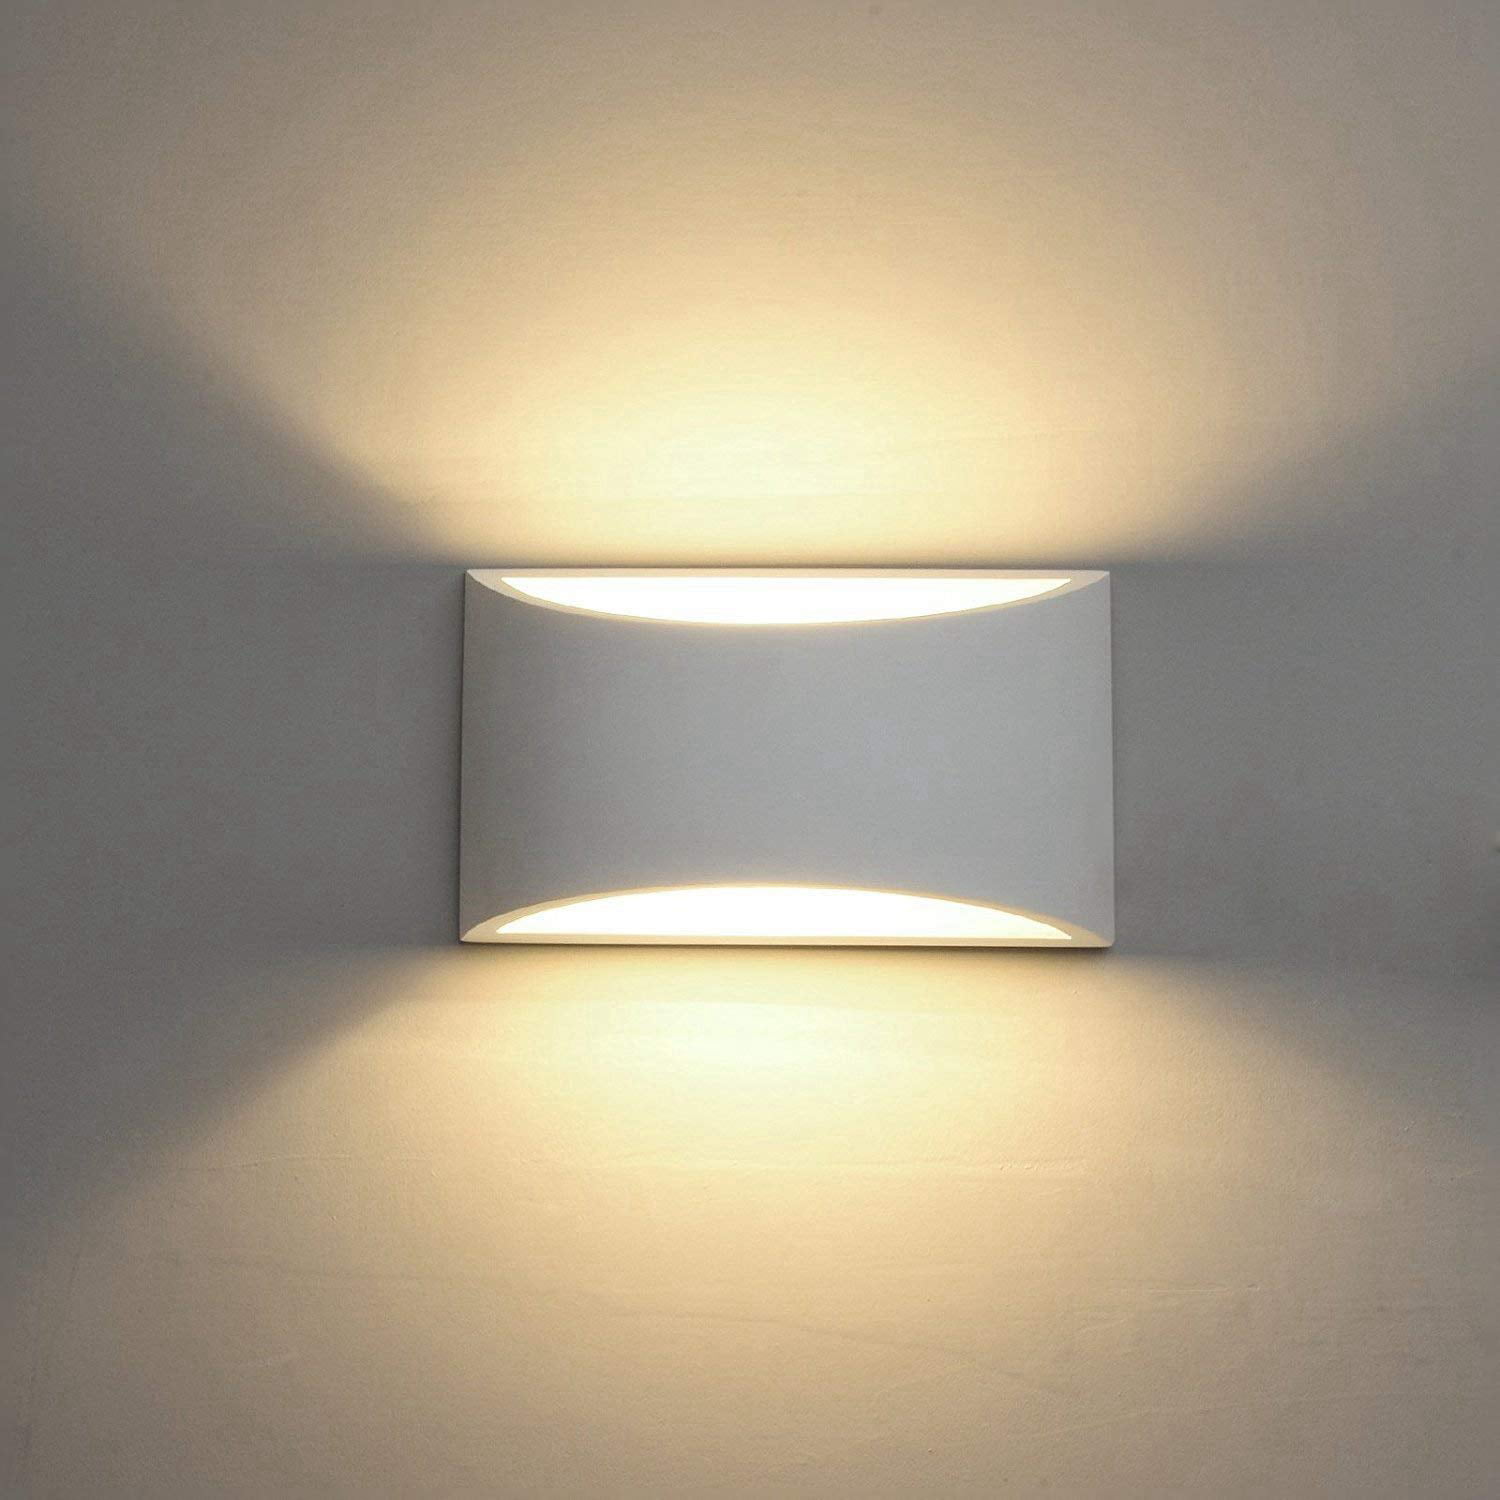 LED Wall Lamp Sconce Stair Light Fixture For Bedroom Aisle Living Room Corridor 